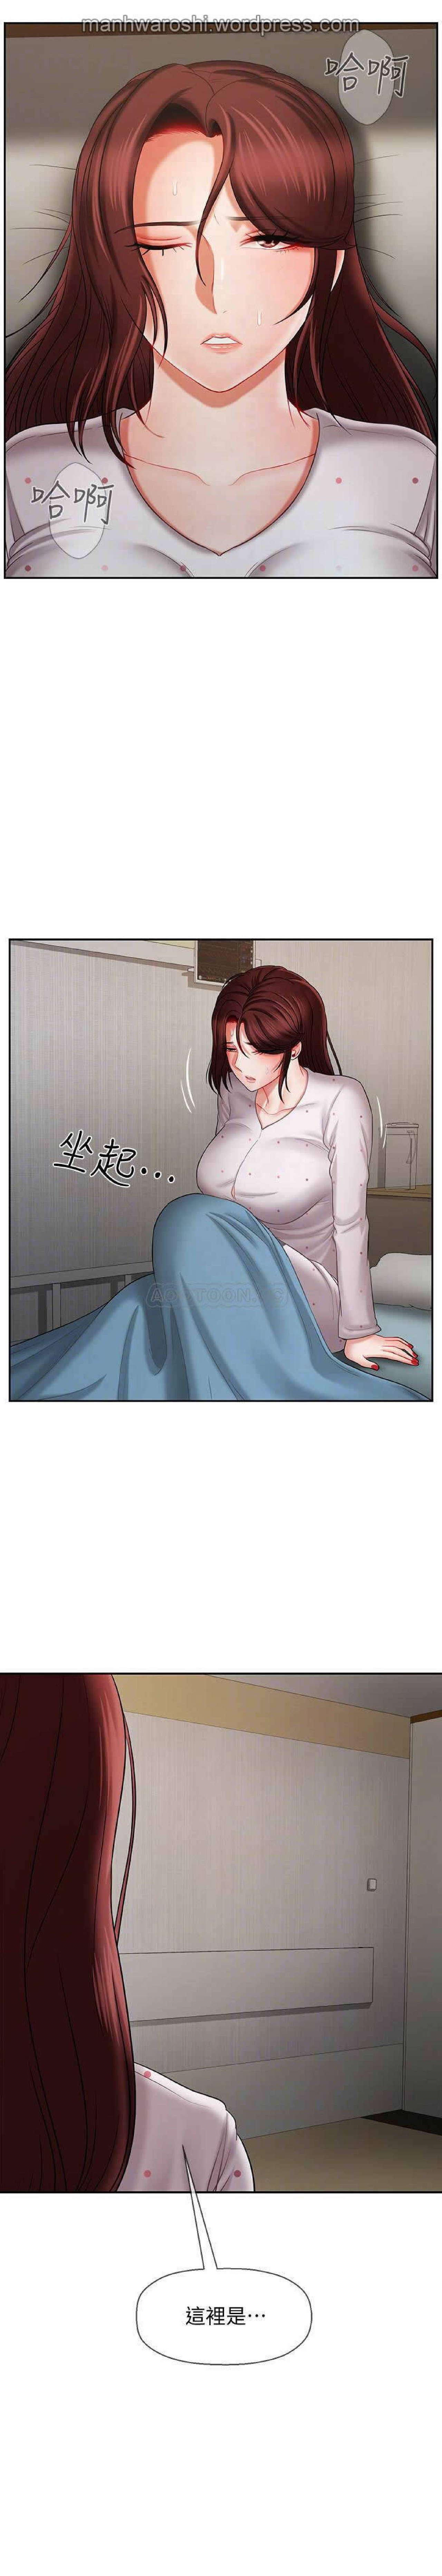 Yanks Featured 坏老师 | PHYSICAL CLASSROOM 12 [Chinese] Manhwa Morena - Page 12